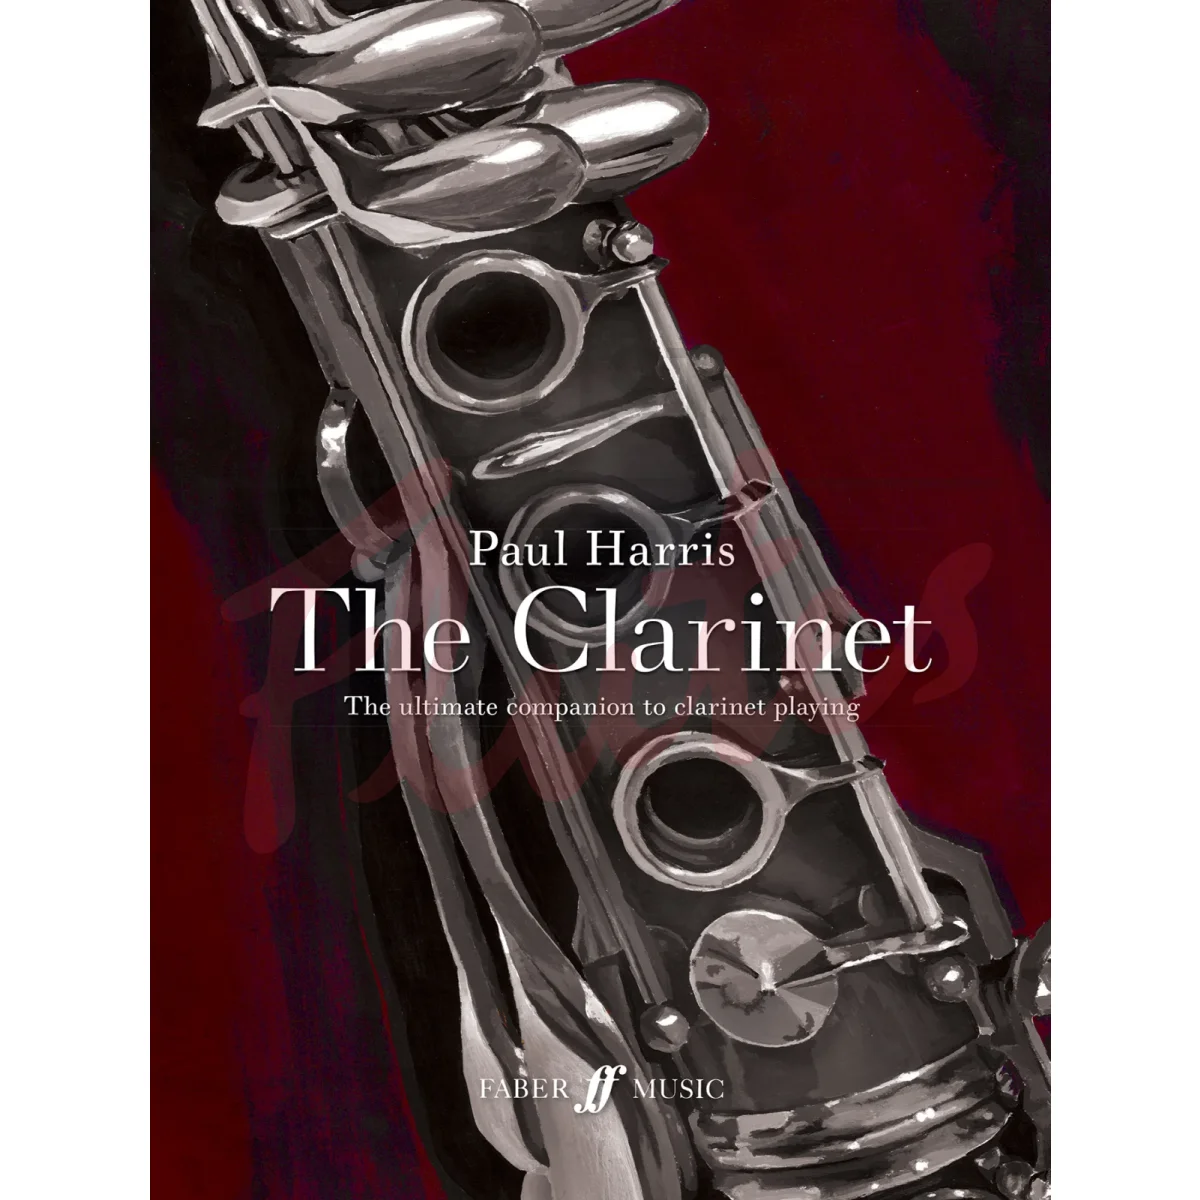 The Clarinet: The Ultimate Companion to Clarinet Playing